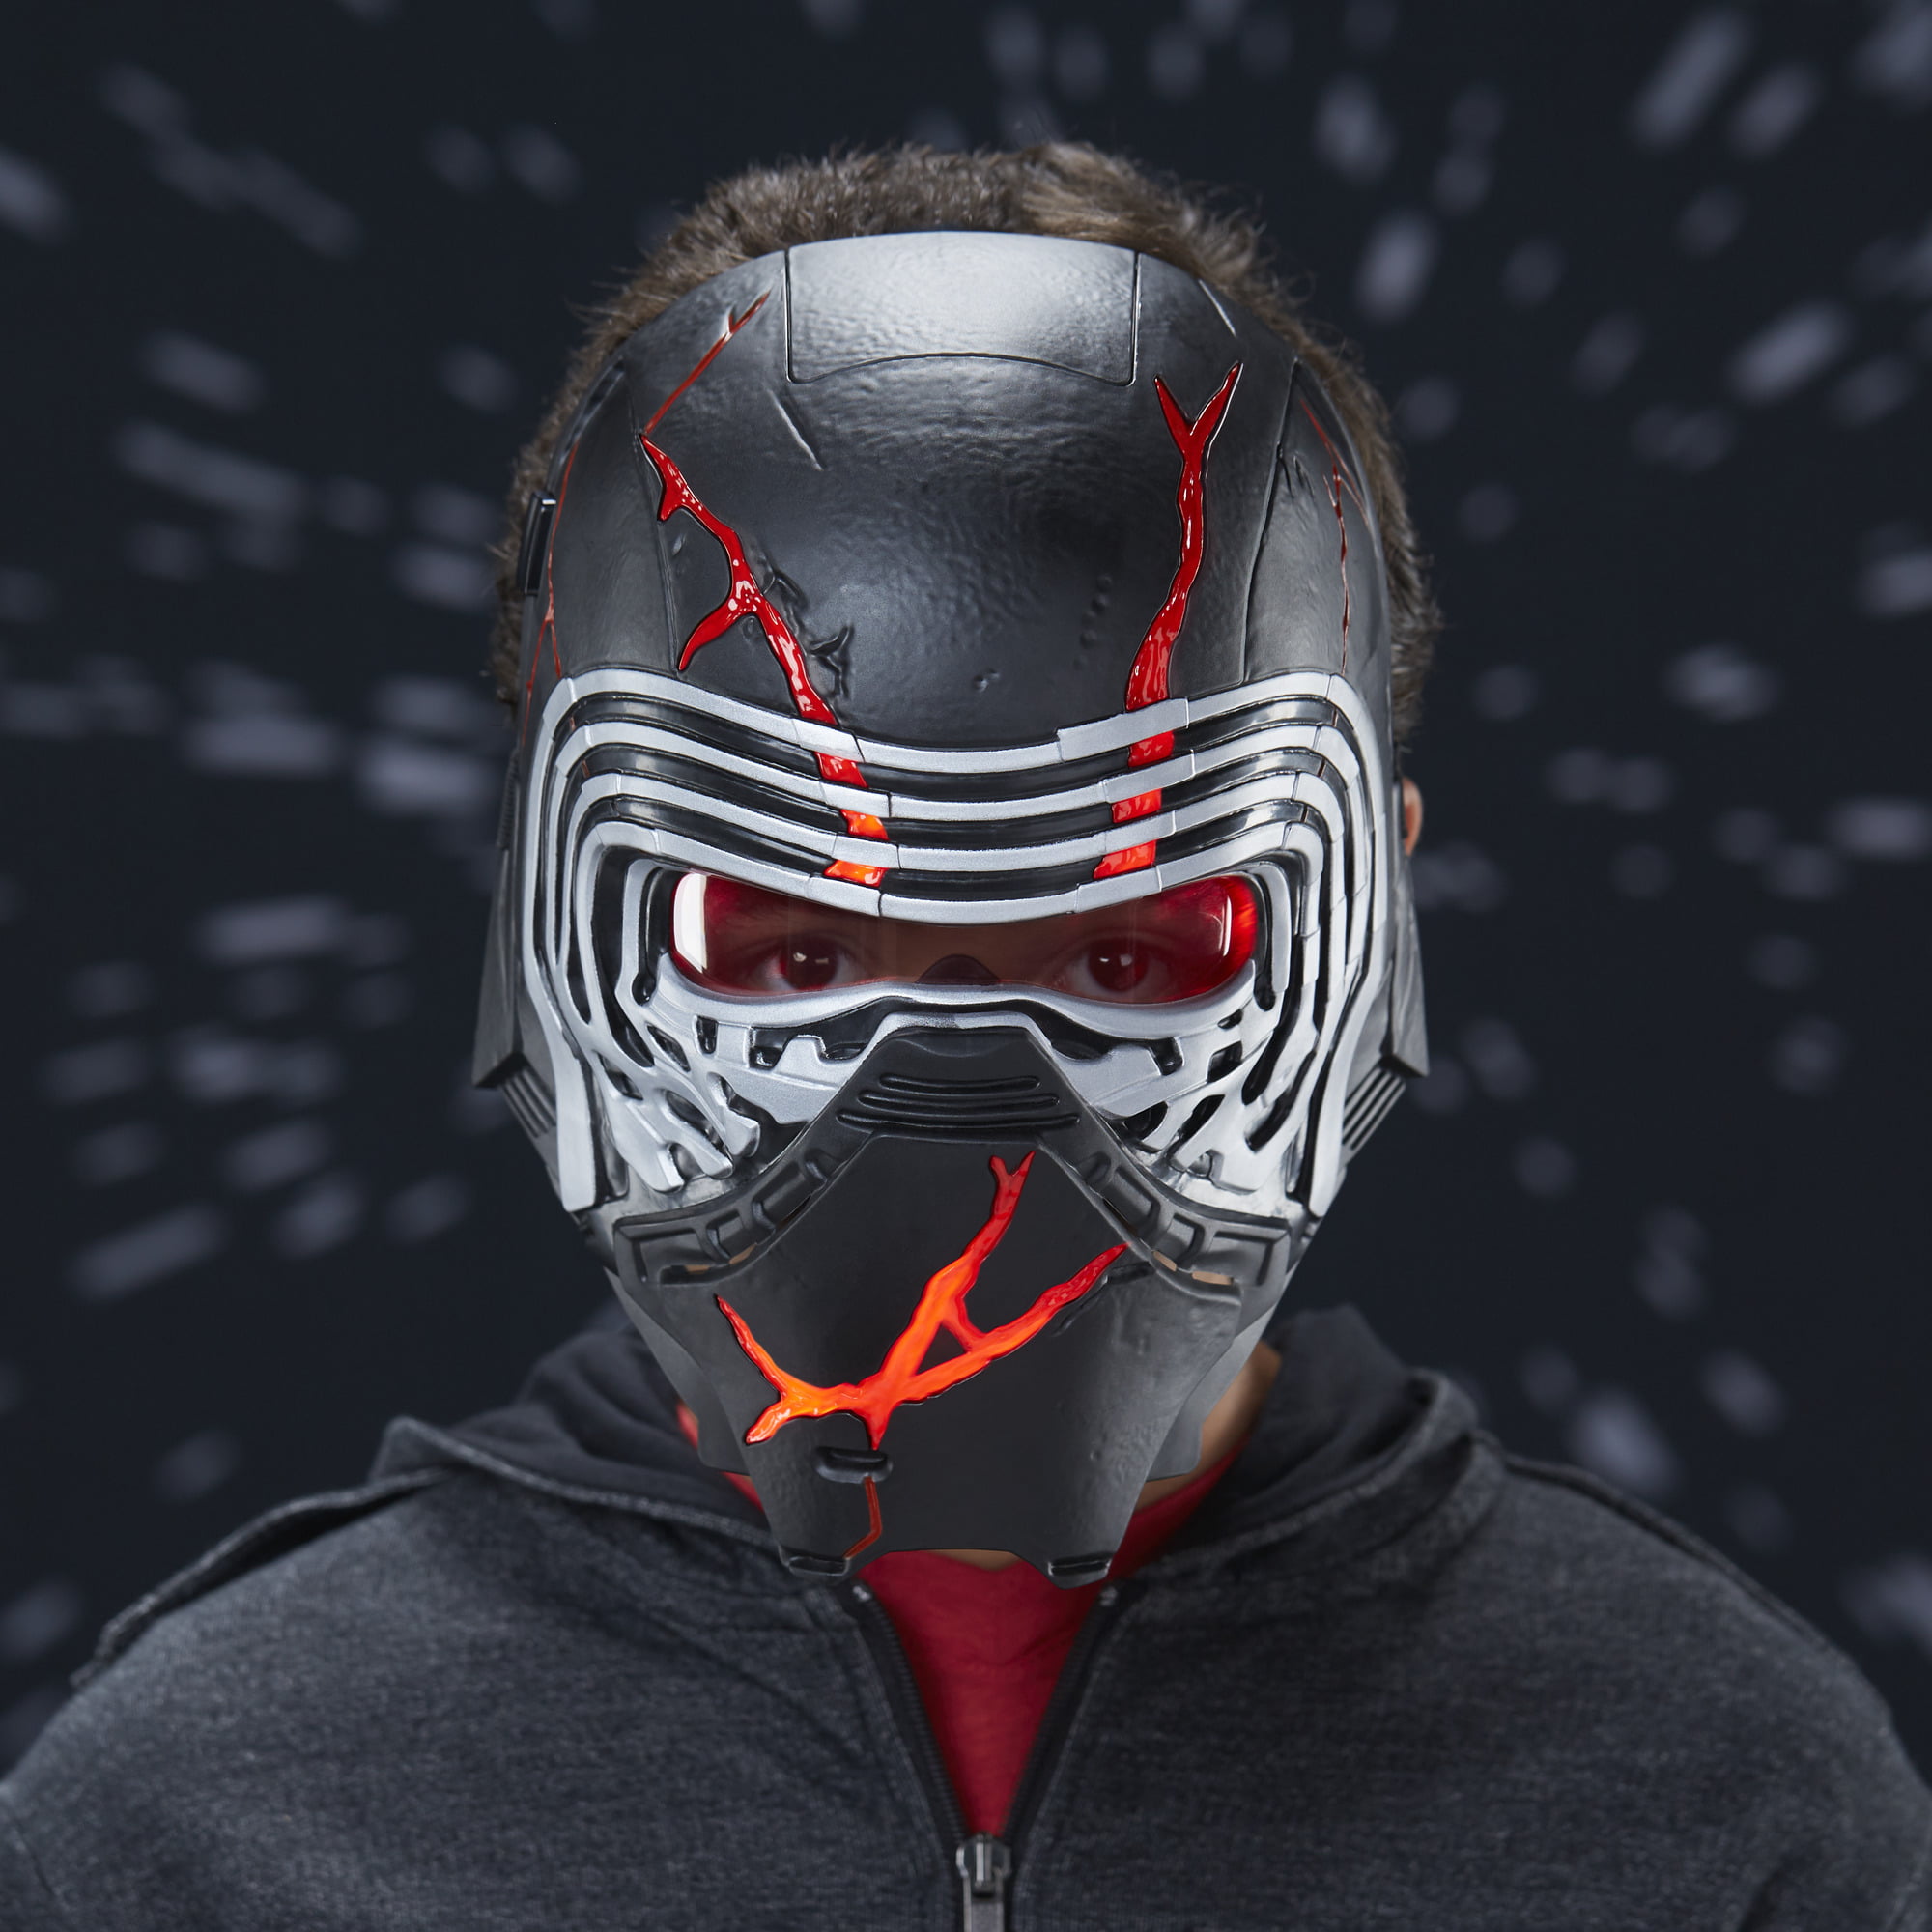 Kylo Ren Electronic Mask Voice Changer Change Role Play Episode 8 The Last Jedi Star Wars